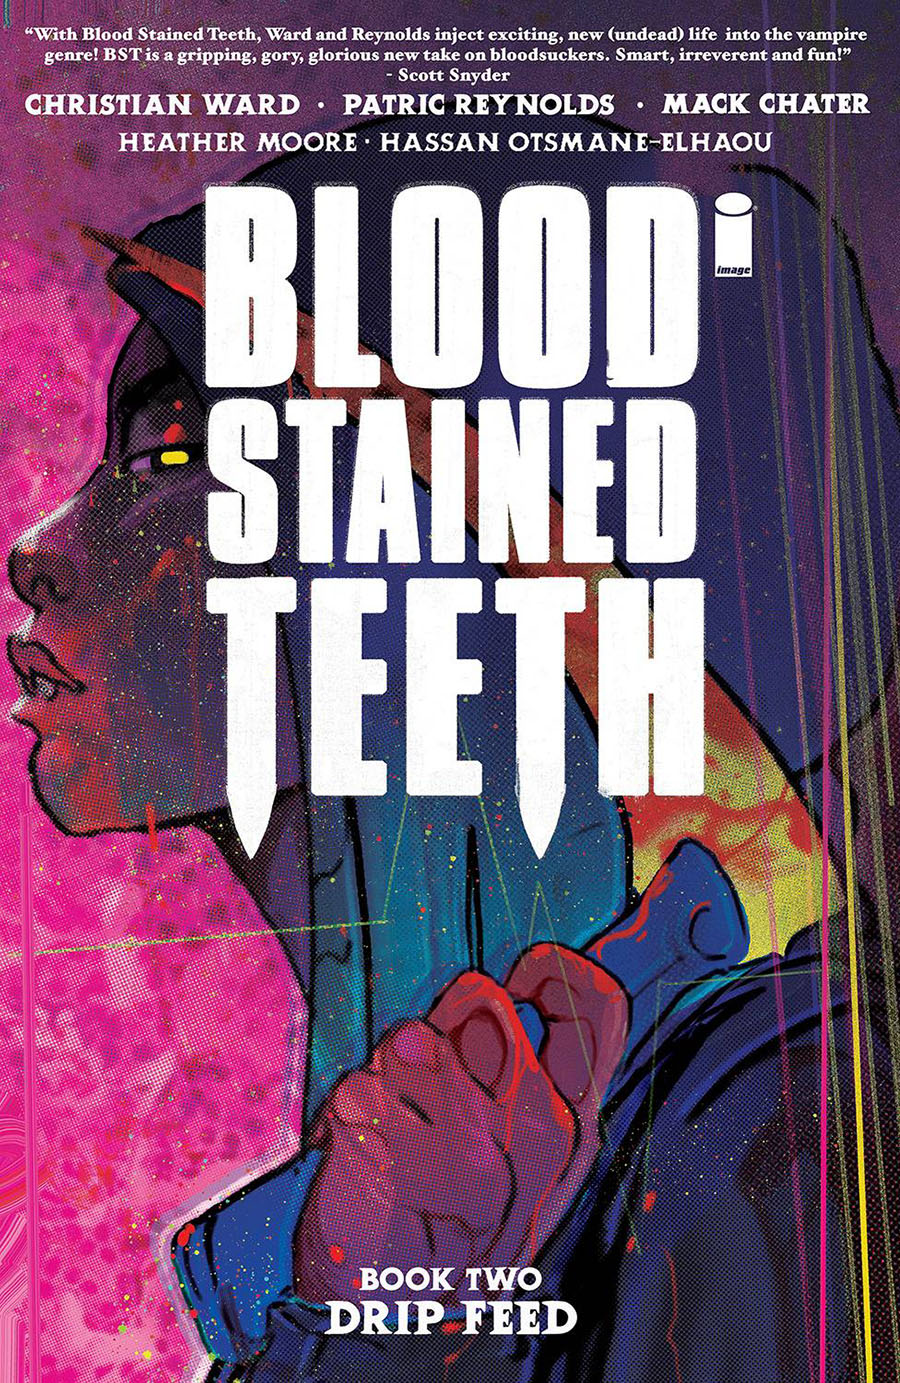 Blood-Stained Teeth Vol 2 Drip Feed TP